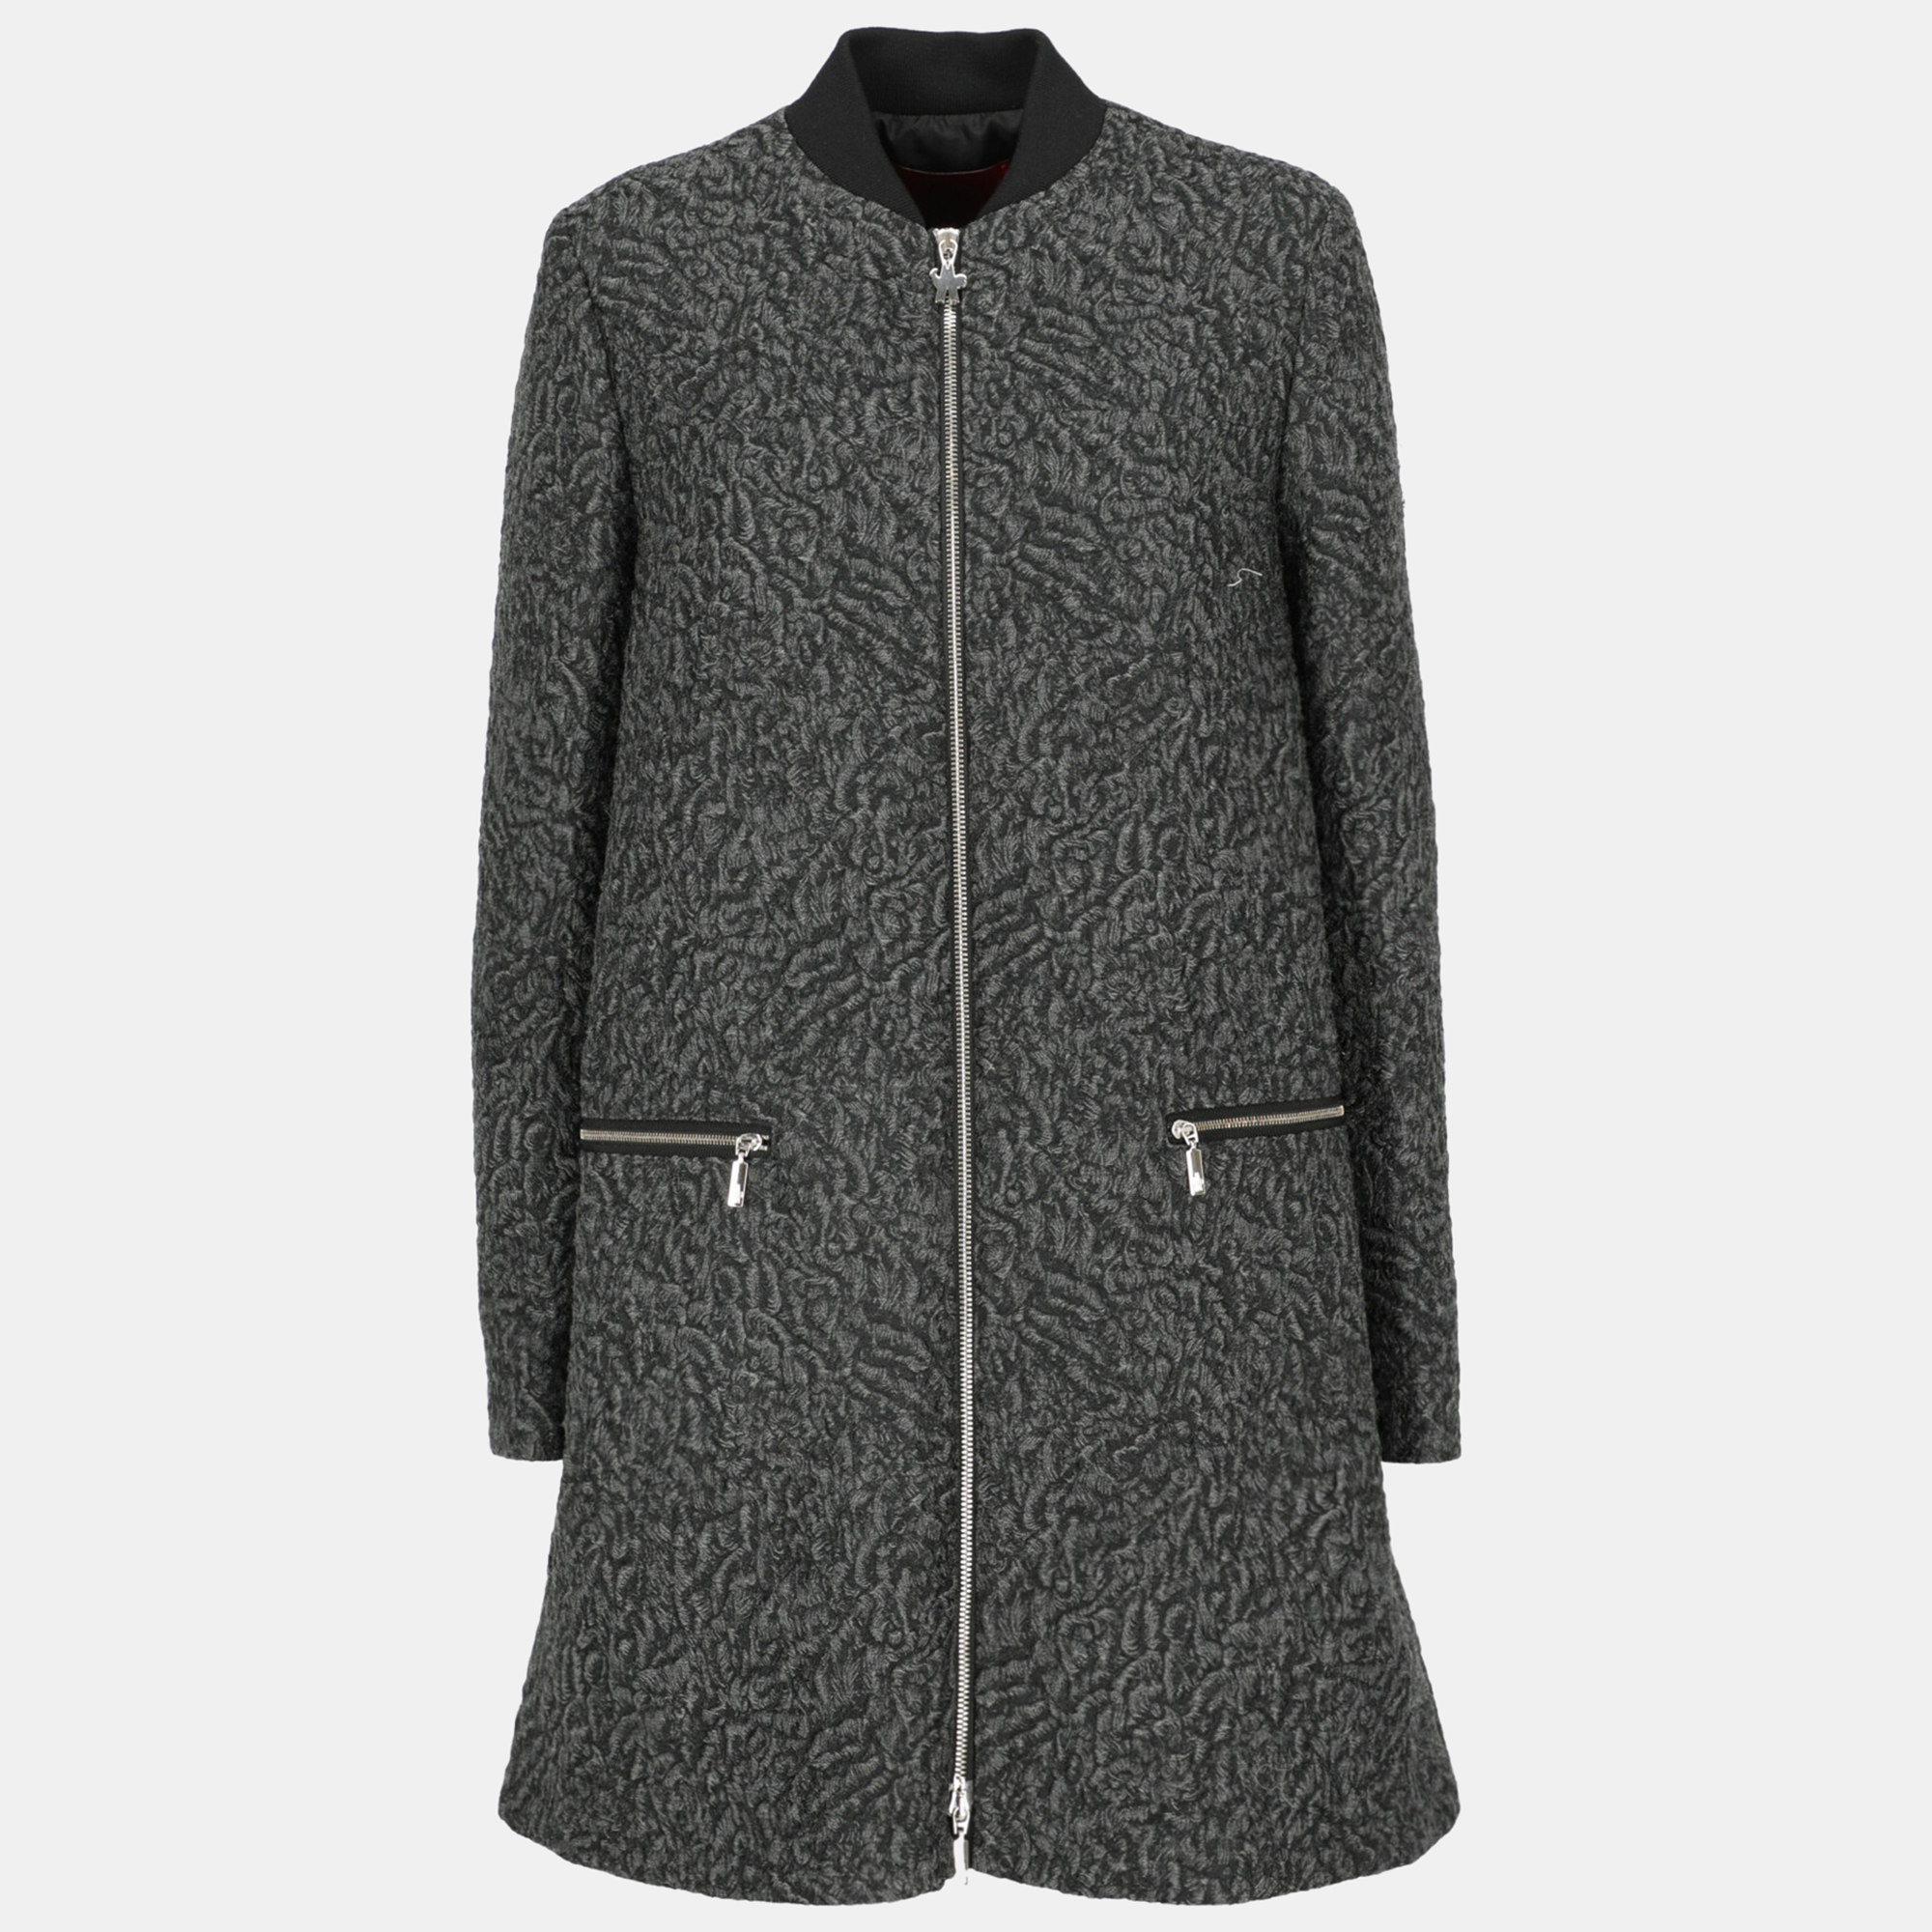 Moncler  Women's Wool Single Breasted Coat - Anthracite - M